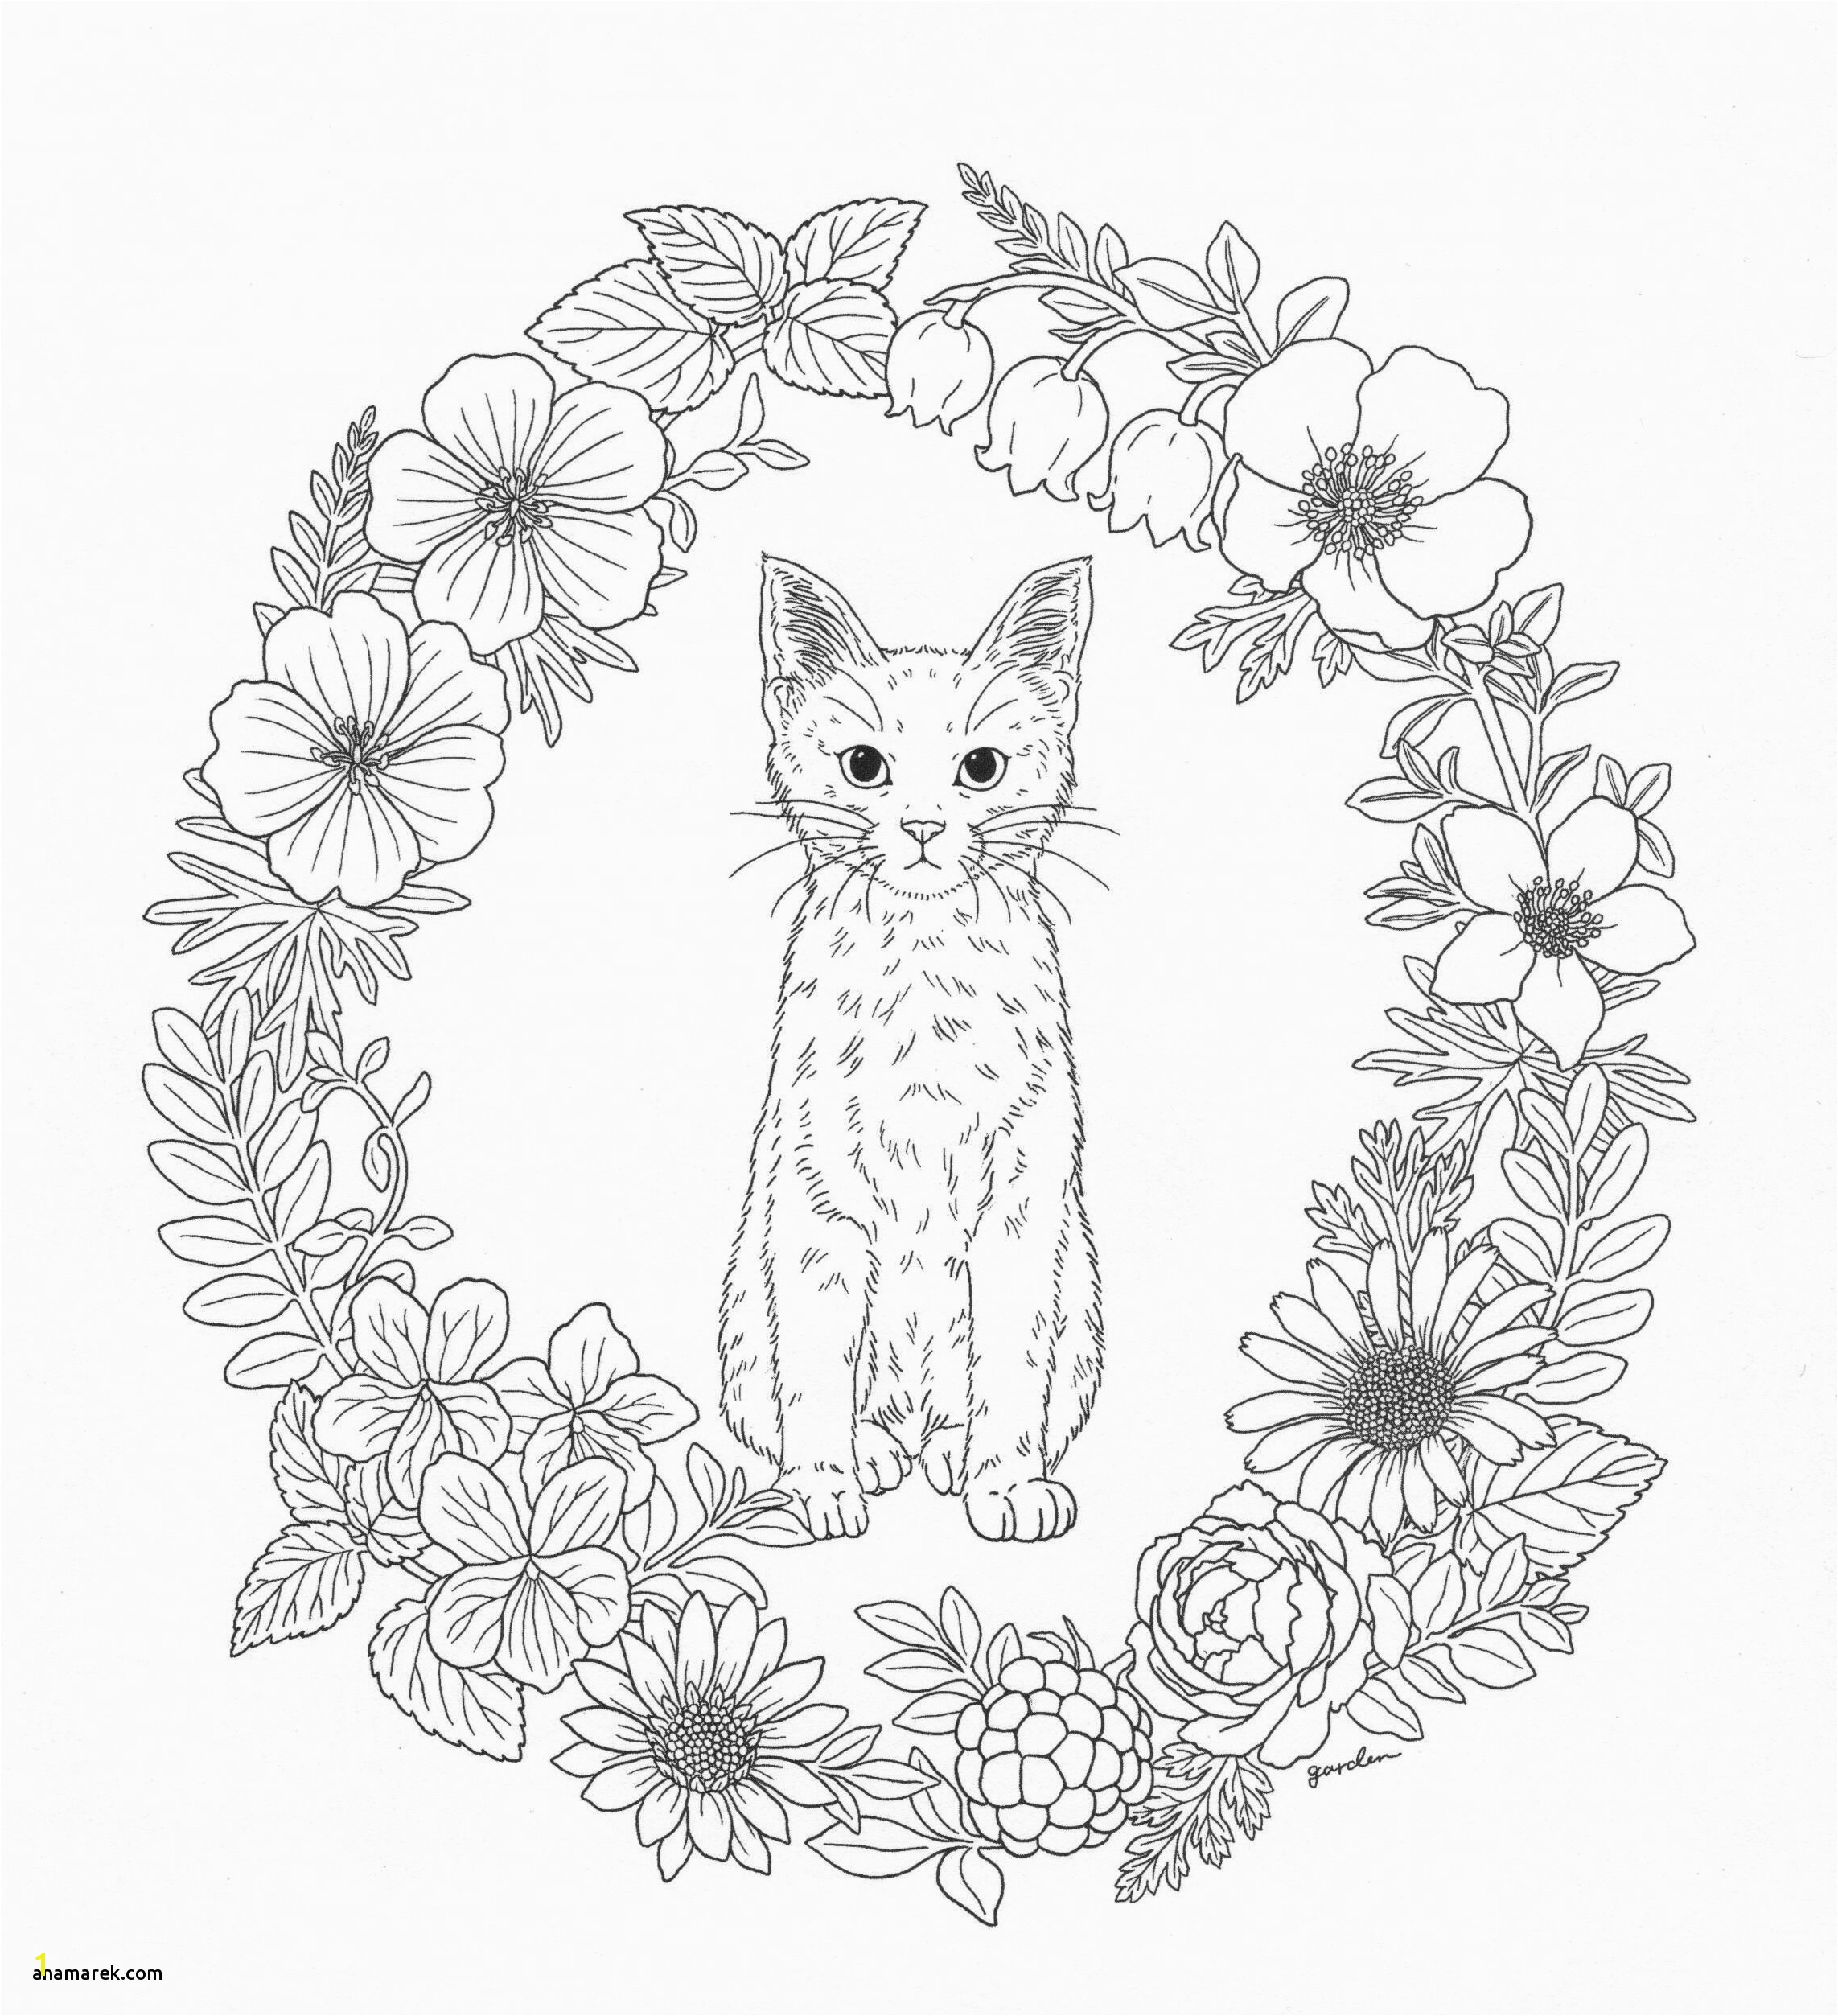 18lovely Crybaby Coloring Book More Image Ideas Crybaby Coloring Book Fresh Melanie Martinez